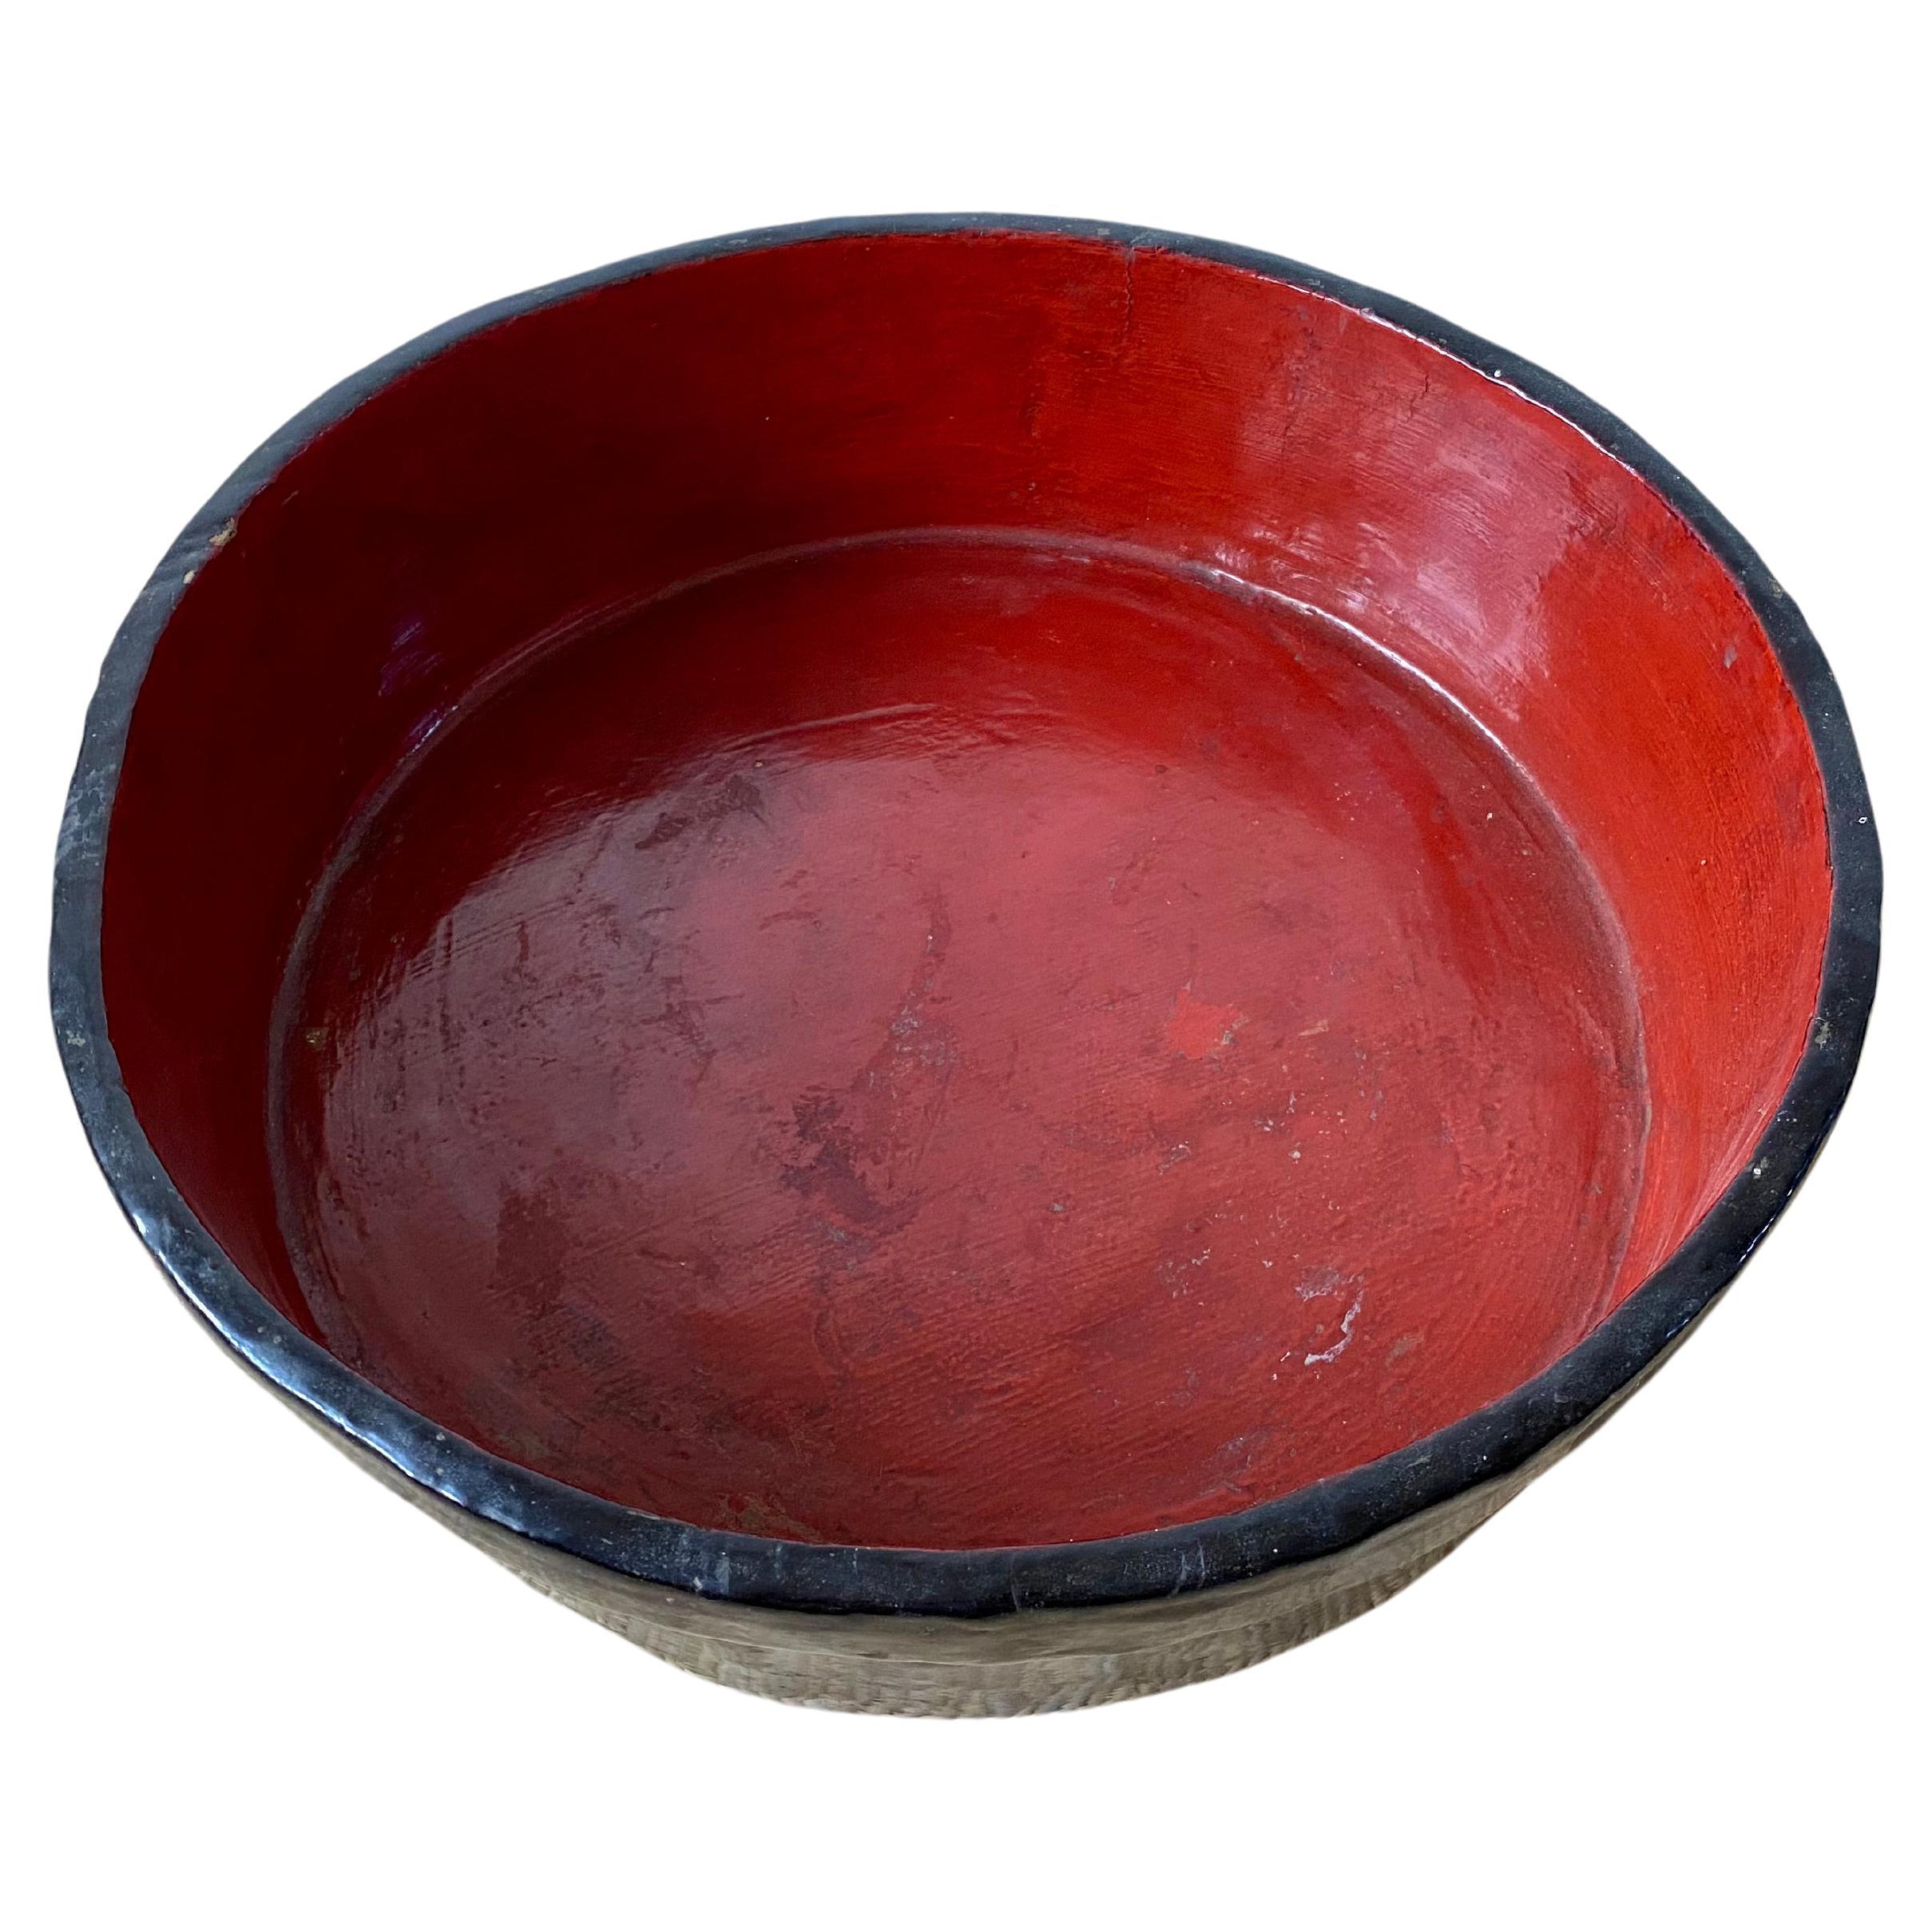 Large Japanese Red & Black Lacquer Wooden Bowl, Early 20th Century For Sale